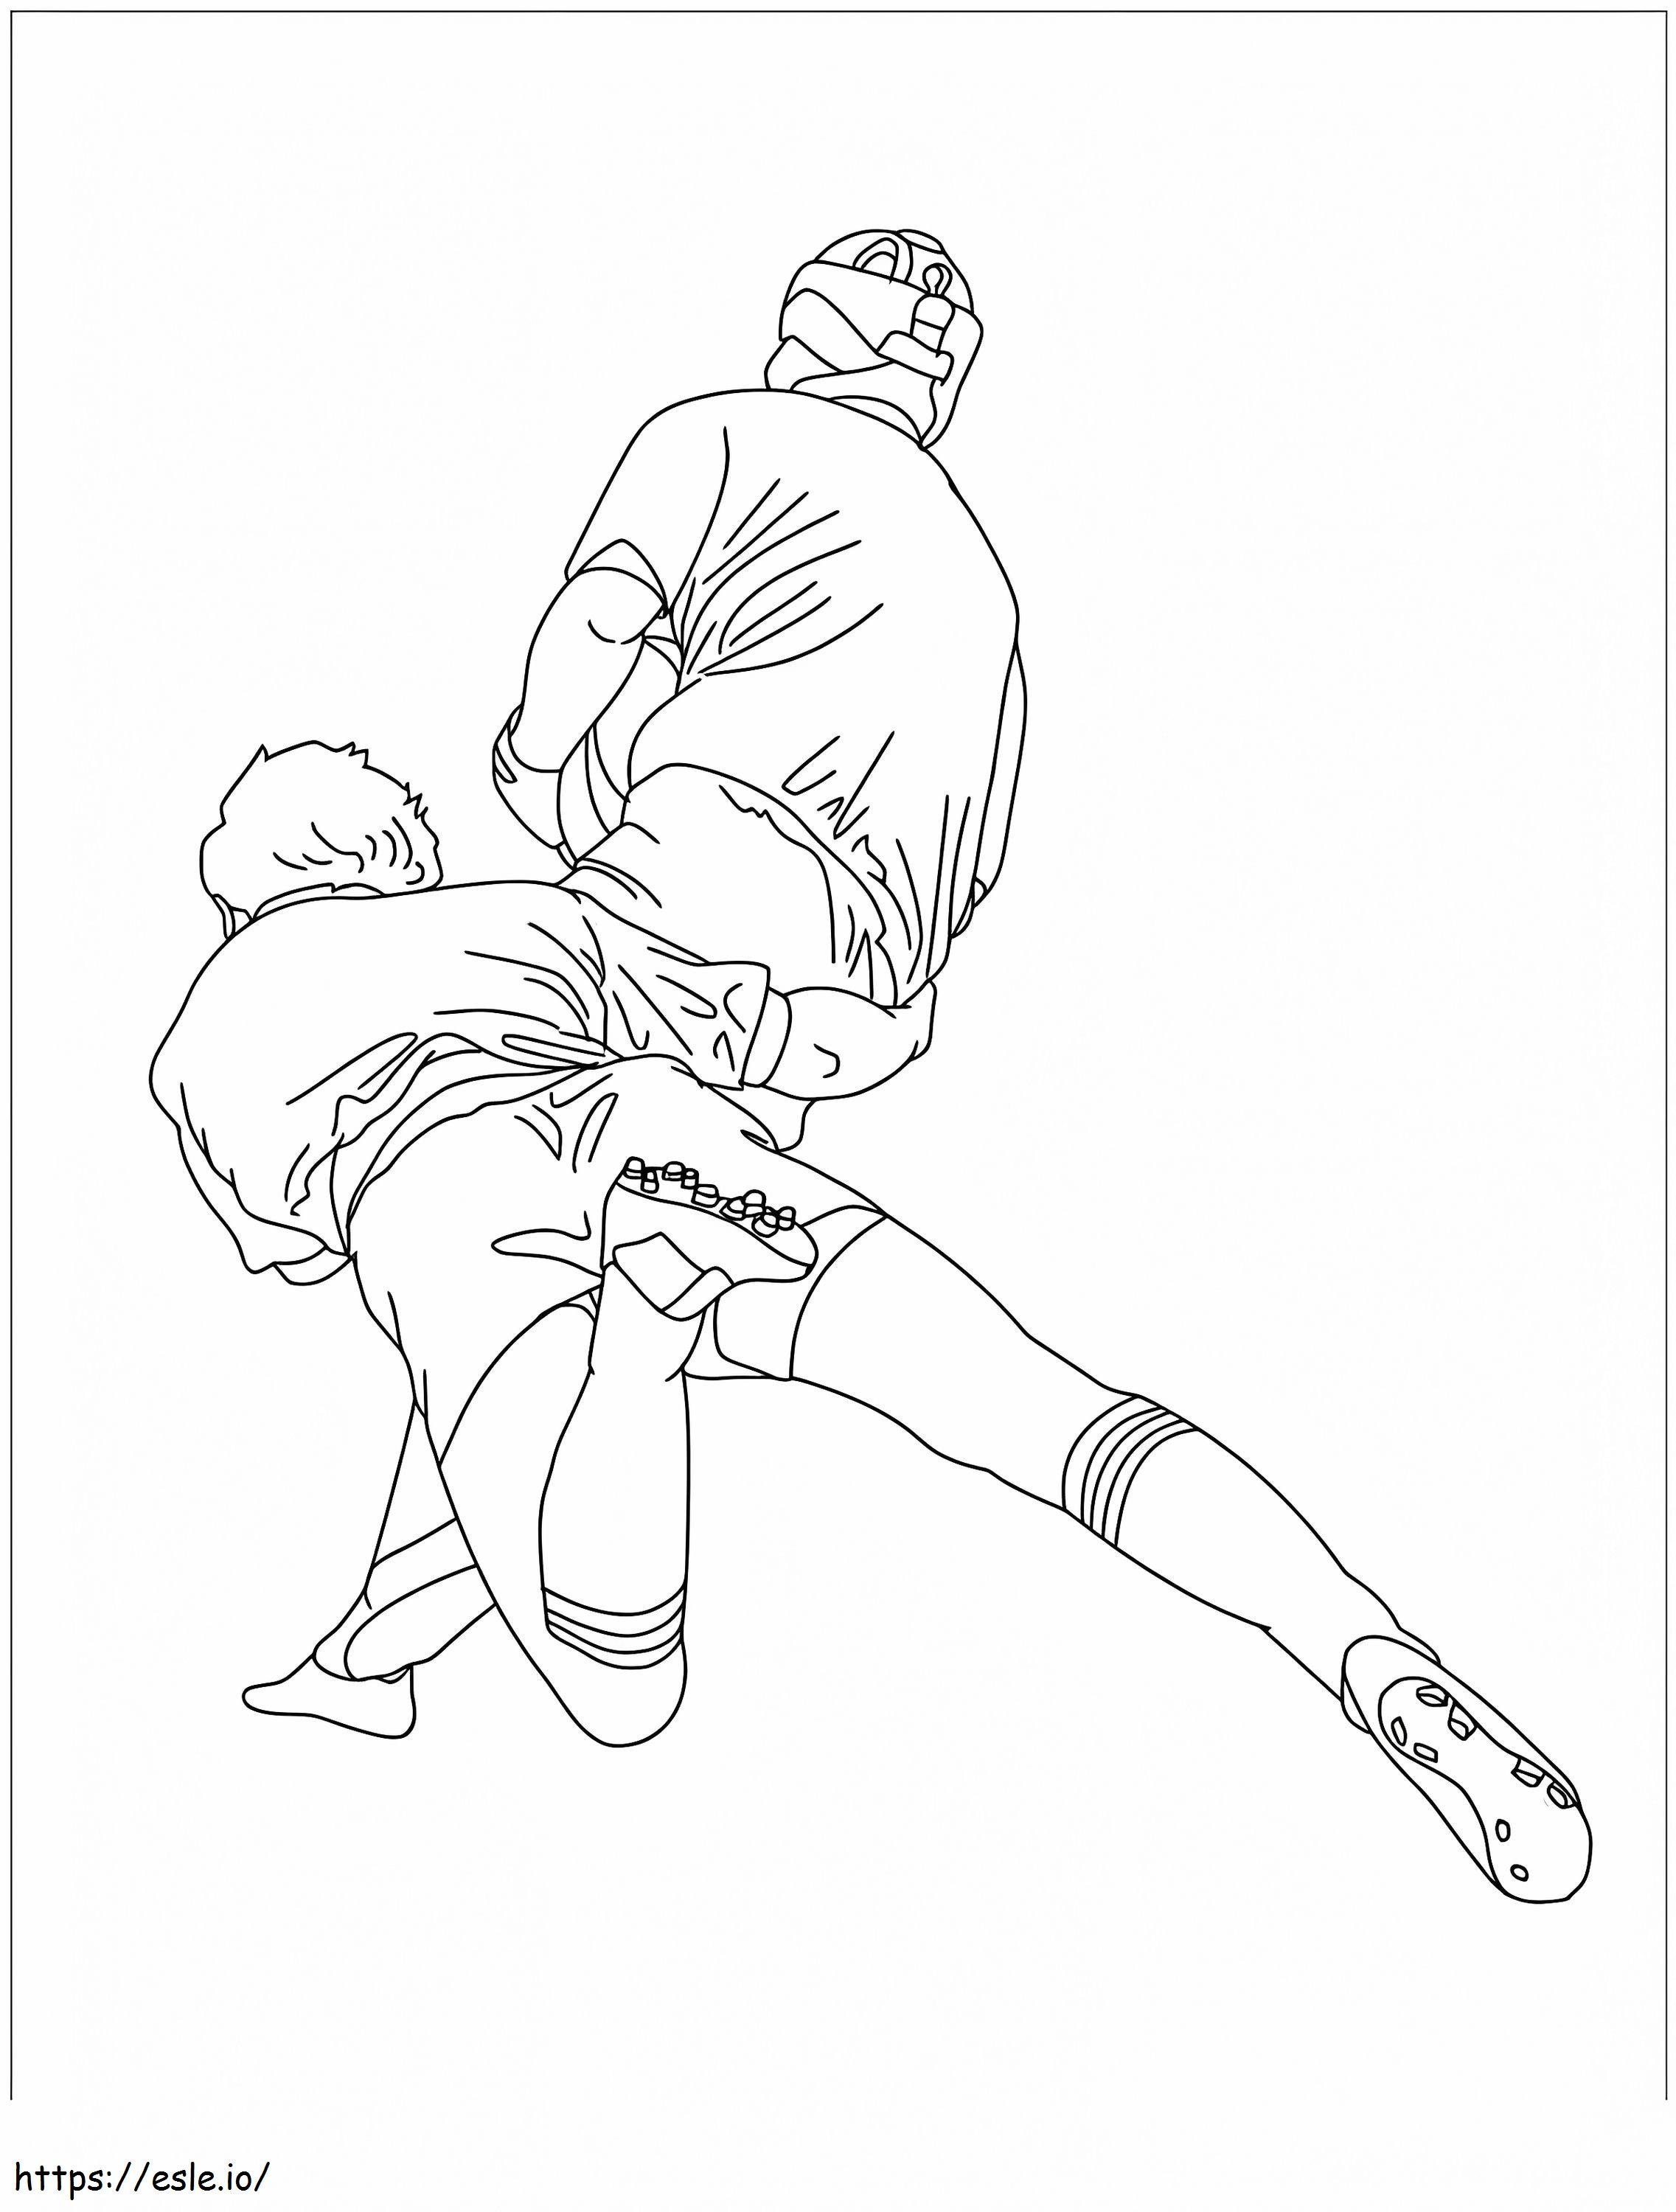 Sergio Ramos And Mohamed Salah coloring page